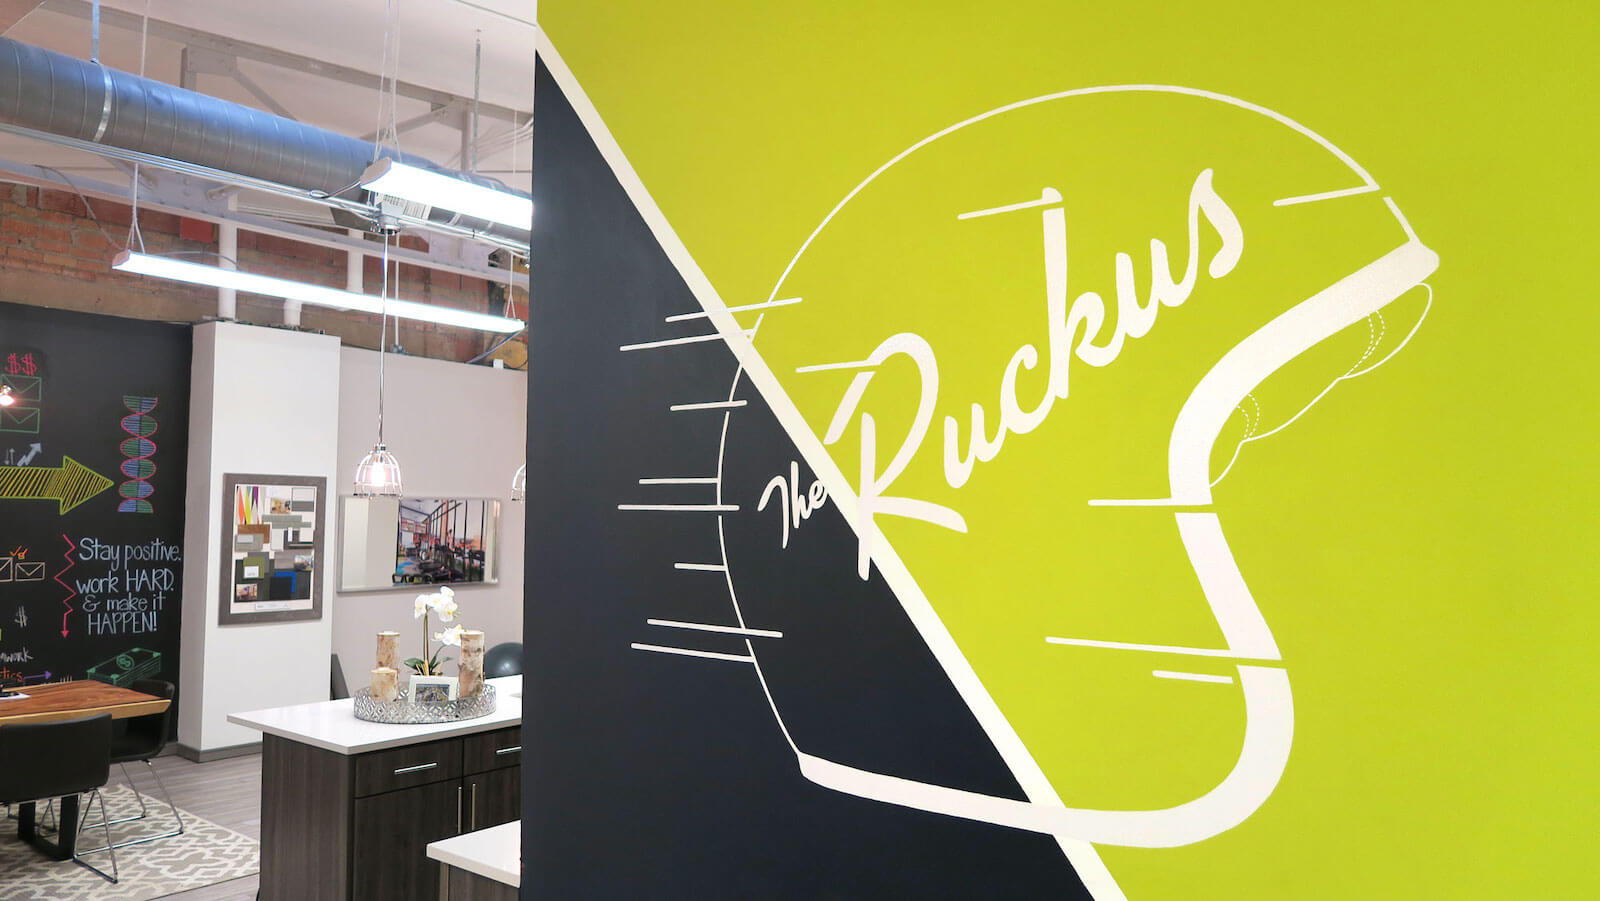 The Ruckus logo and branding at headquarters